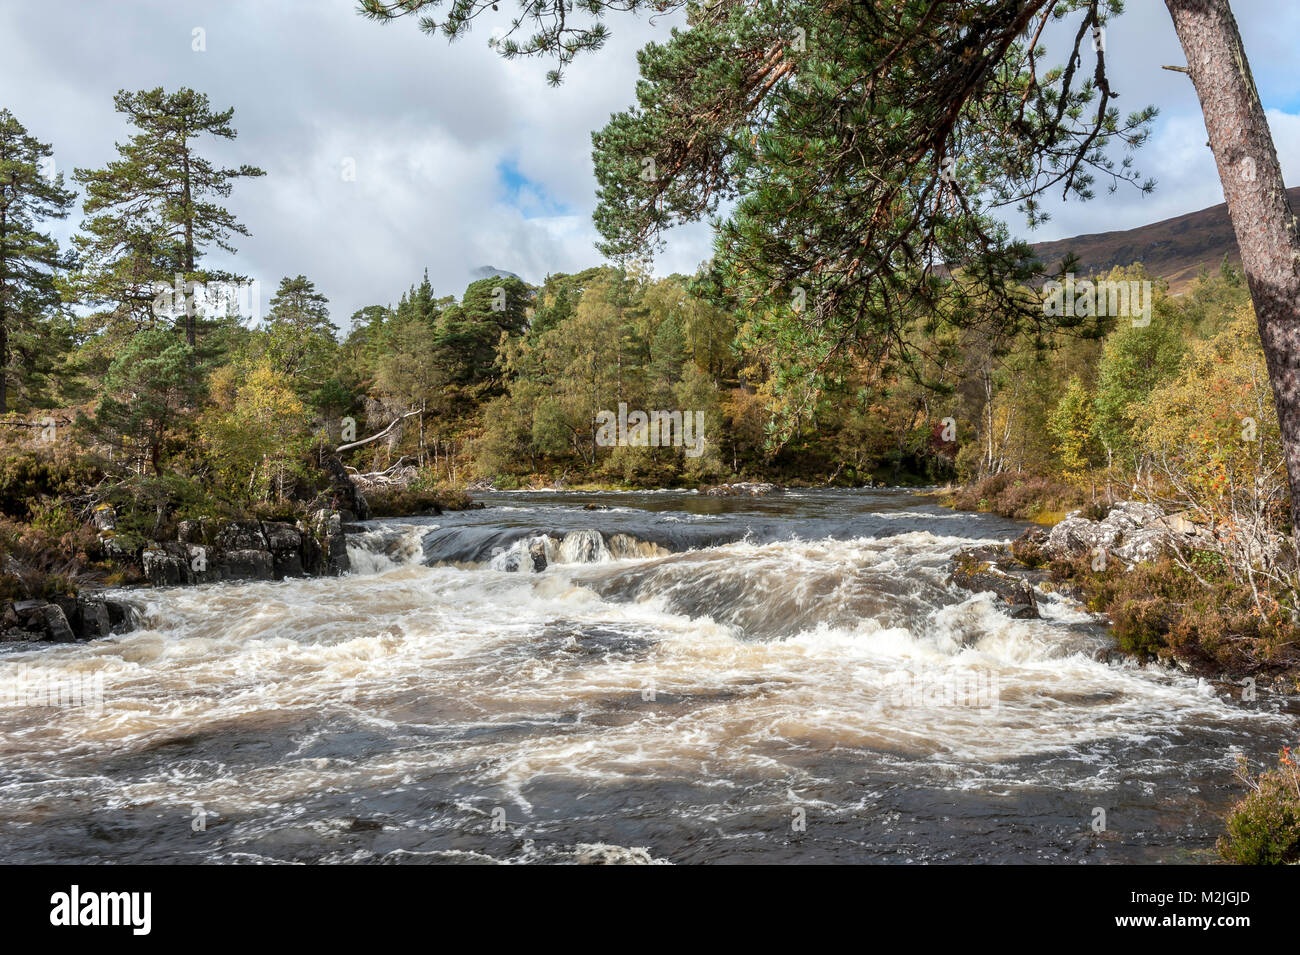 The beauty of Scotland's rivers Dog Falls Glen Affric in the Scottish Highlands Stock Photo